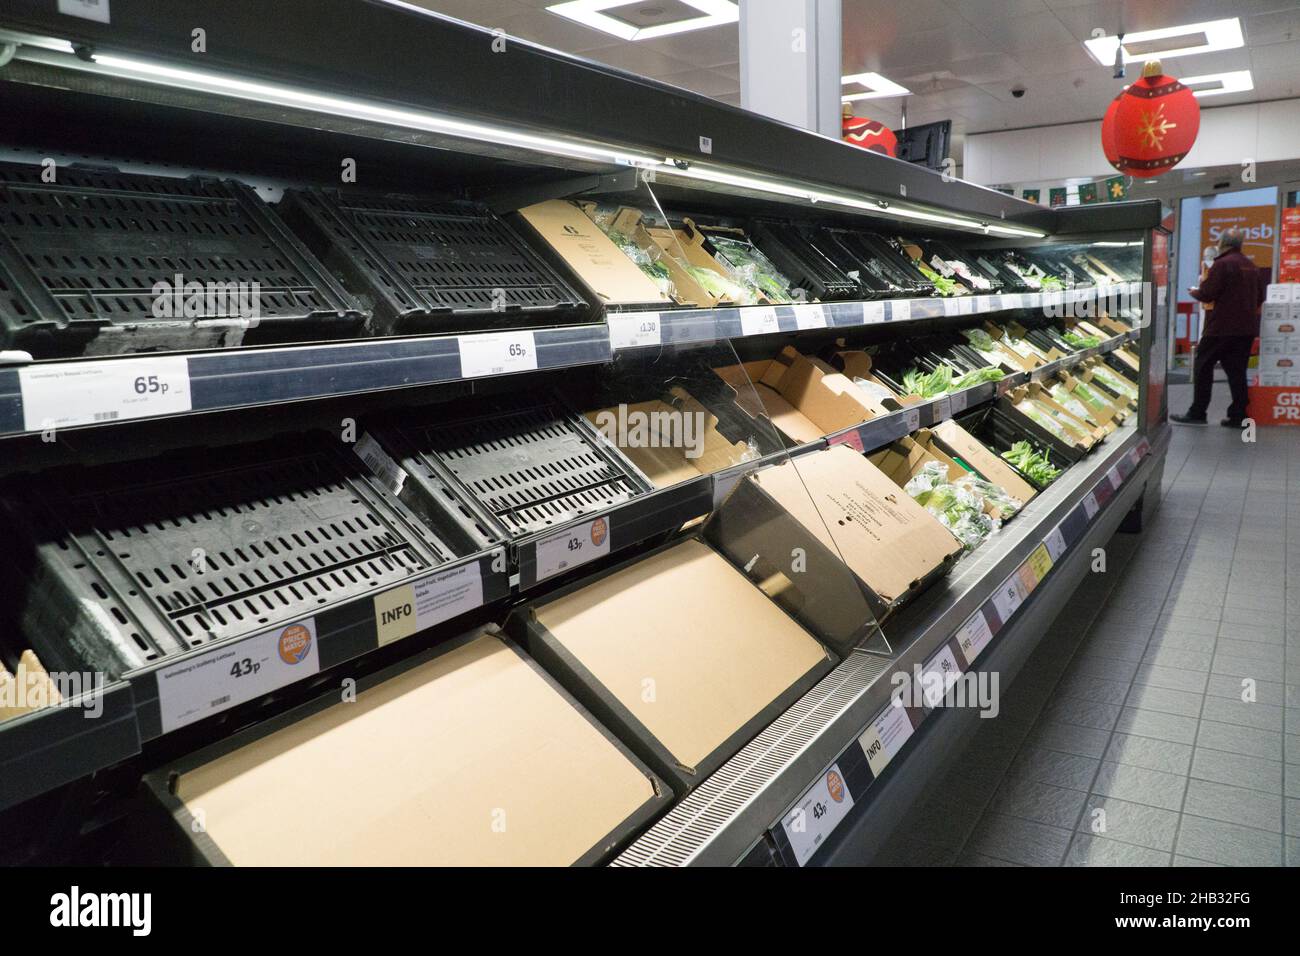 London, UK, 16 December 2021: In the Clapham High Street branch of Sainsbury's the fresh vegetable section is lacking in lettuce. A combination of labour shortages due to Brexit and supply chain problems due to coronavirus has left some vegetables unavailable in supermarkets. Anna Watson/Alamy Live News Stock Photo